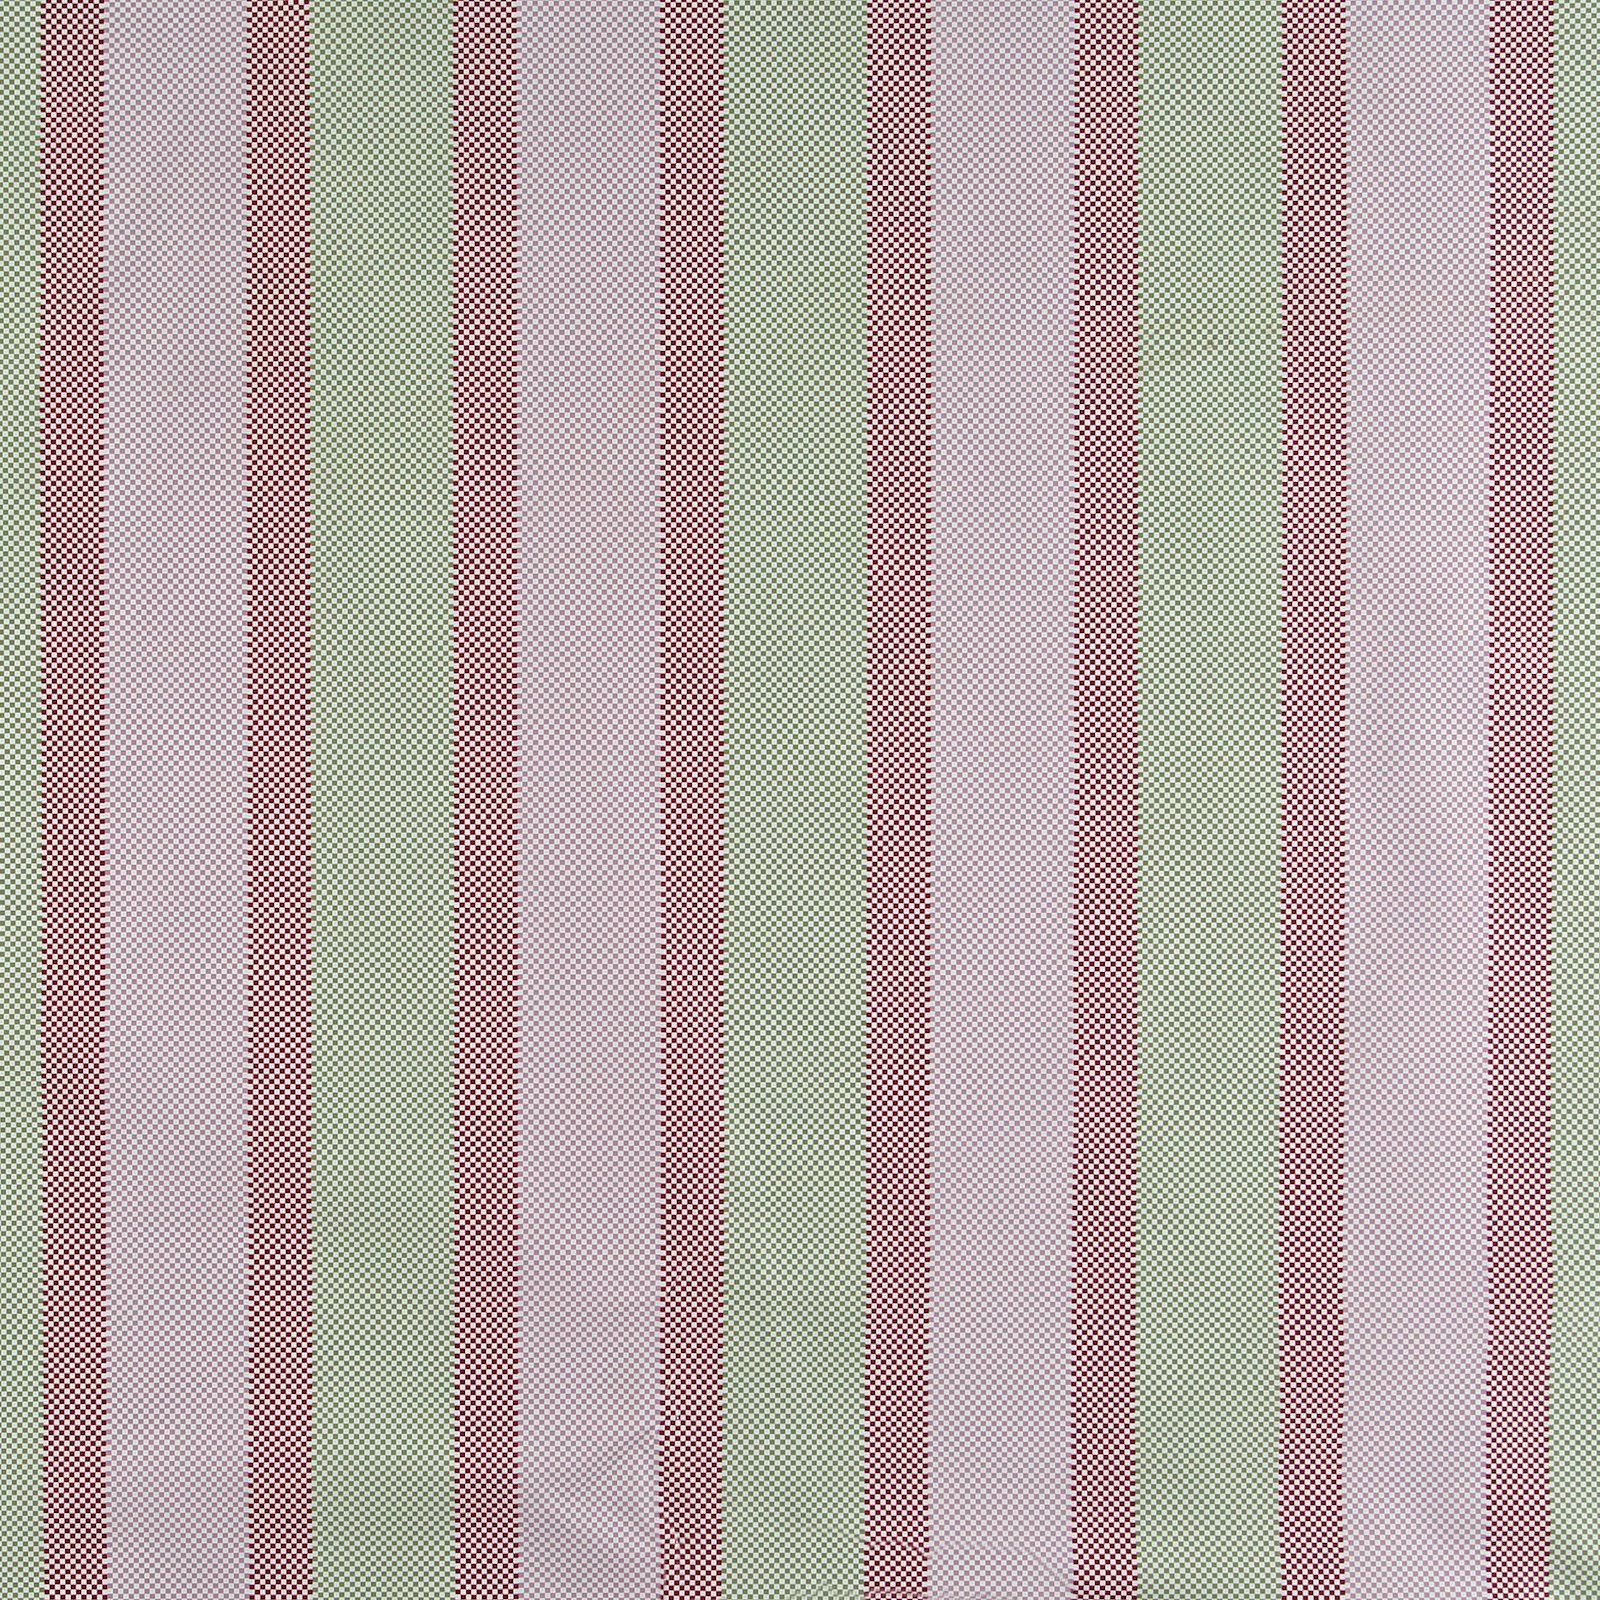 Non-woven oilcloth green/violet stripes 866123_pack_sp